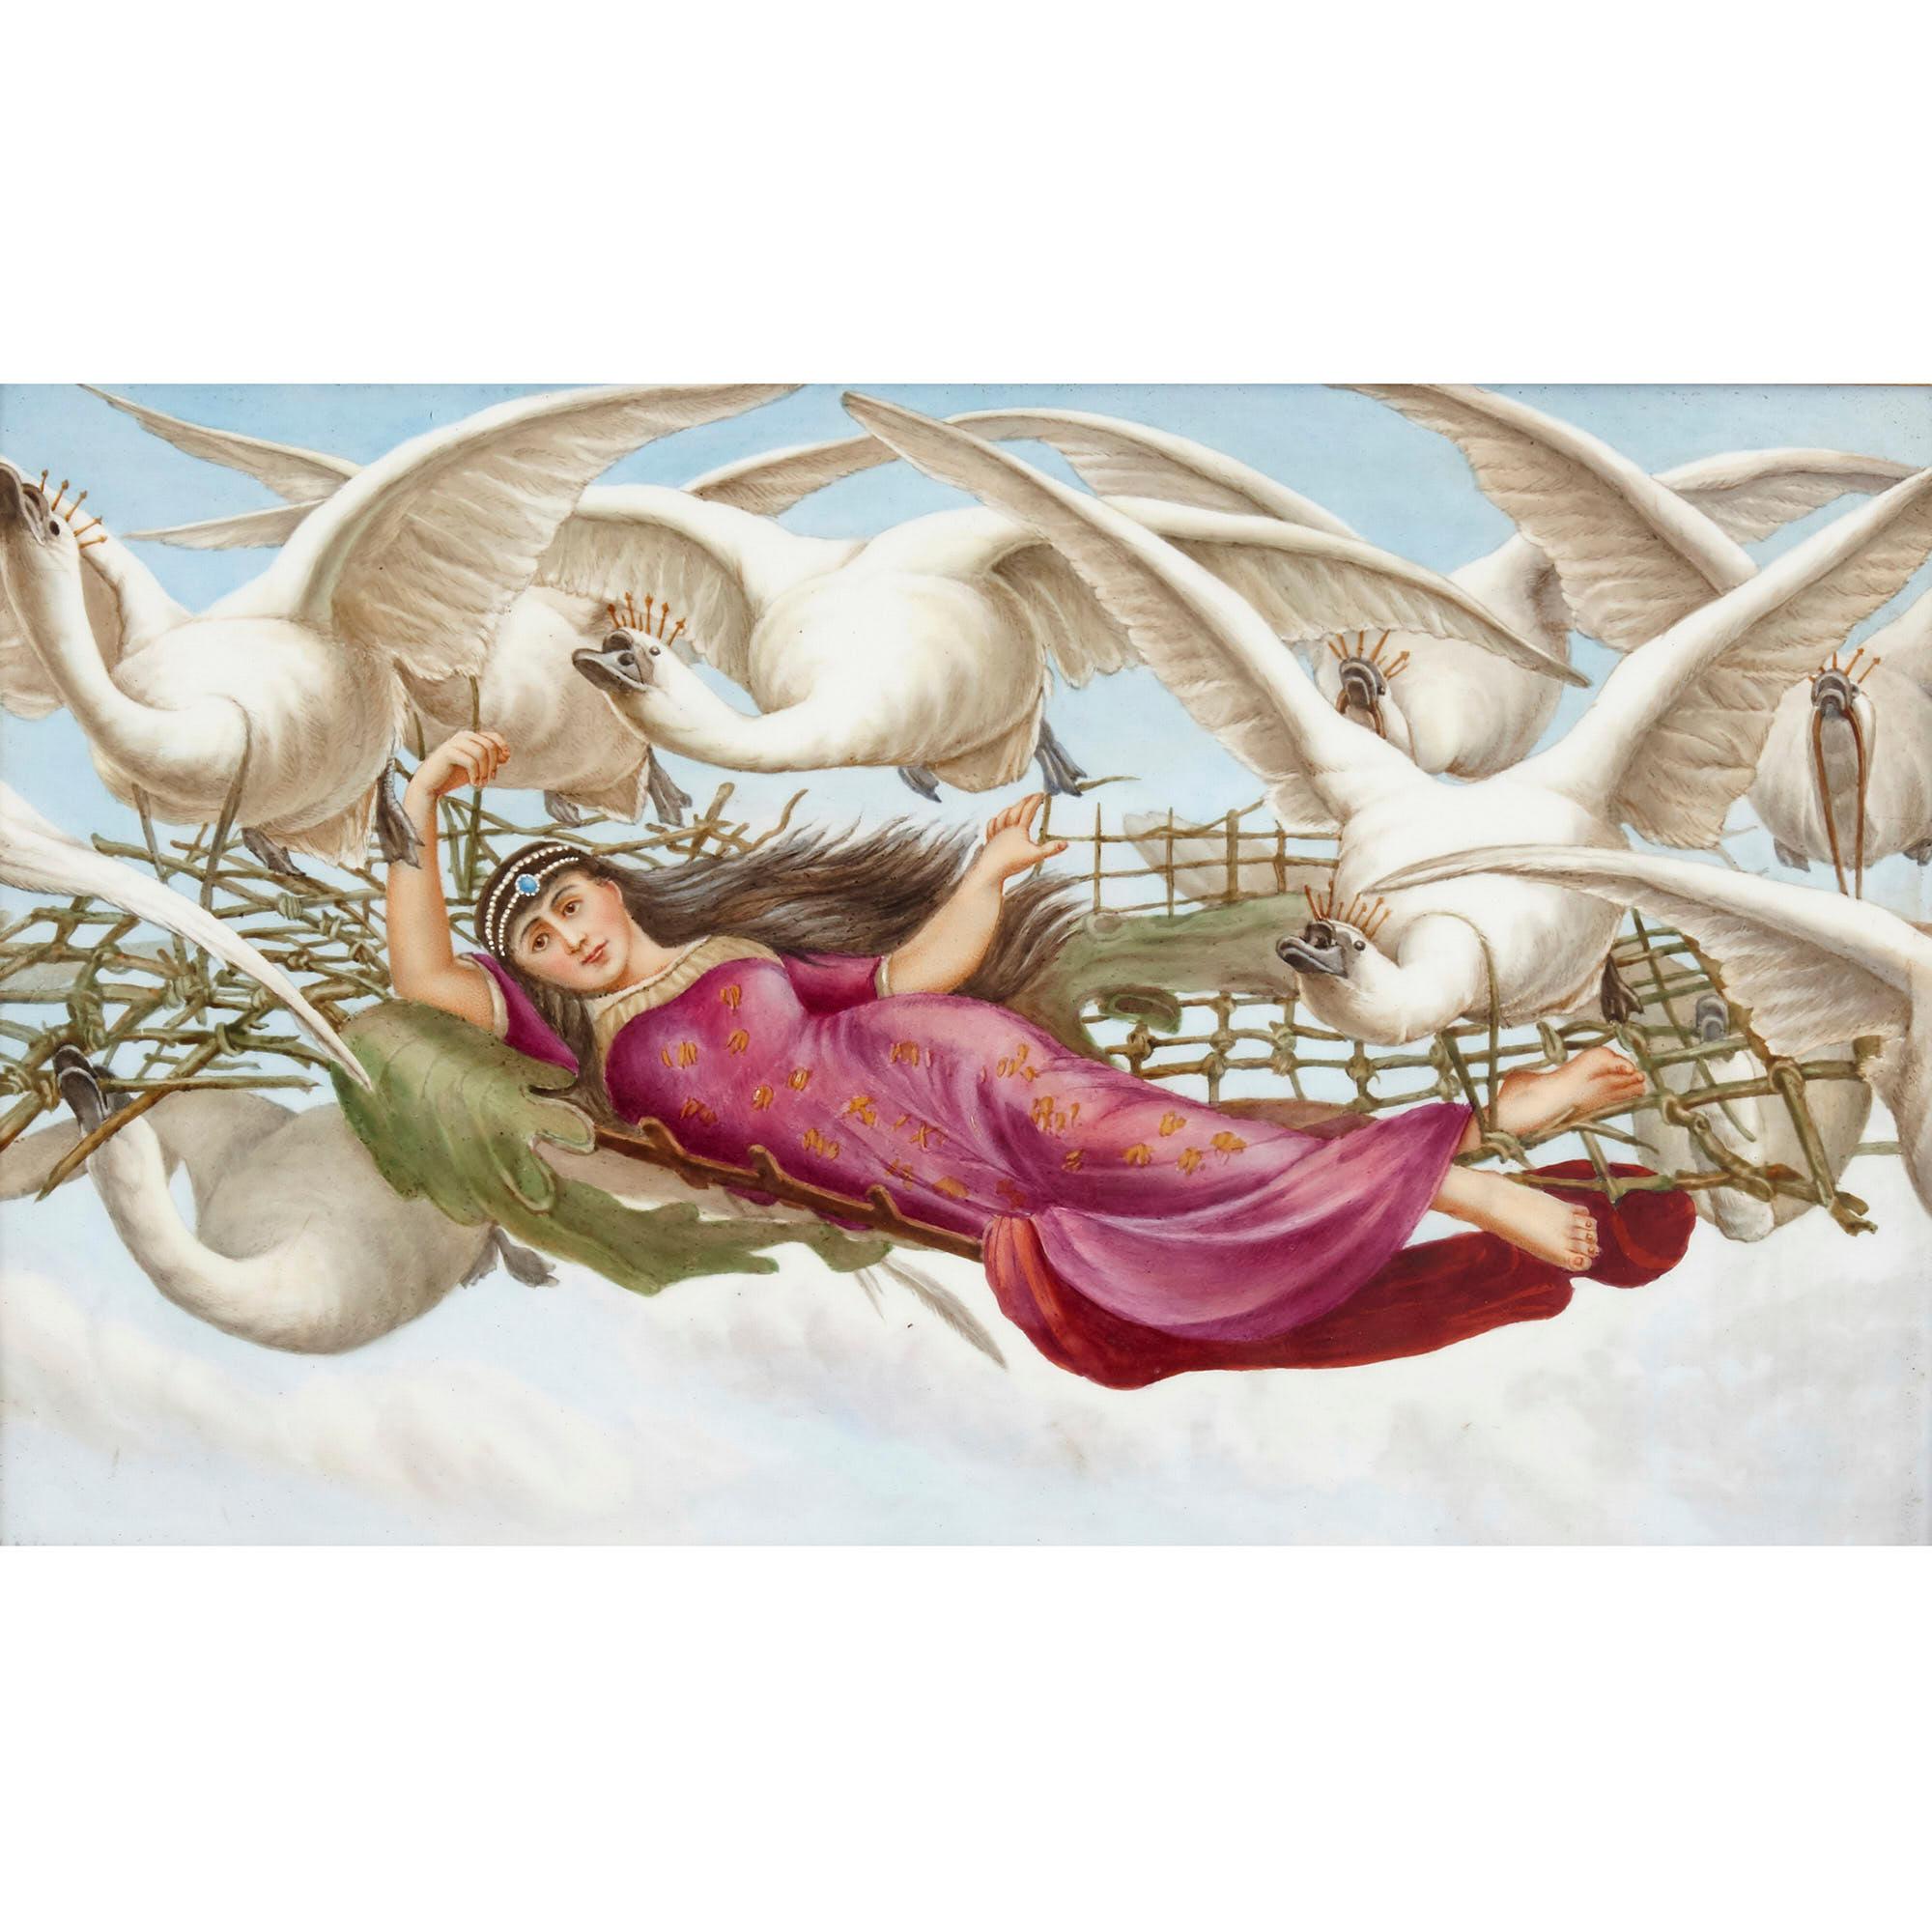 Painted porcelain plaque of woman flown aloft by swans
English, 1884
Measures: Frame: Height 37cm, width 50cm, depth 5cm
Plaque: Height 20cm, width 22.5cm, depth 0.5cm

This beautiful English porcelain plaque is painted with a spectacular scene